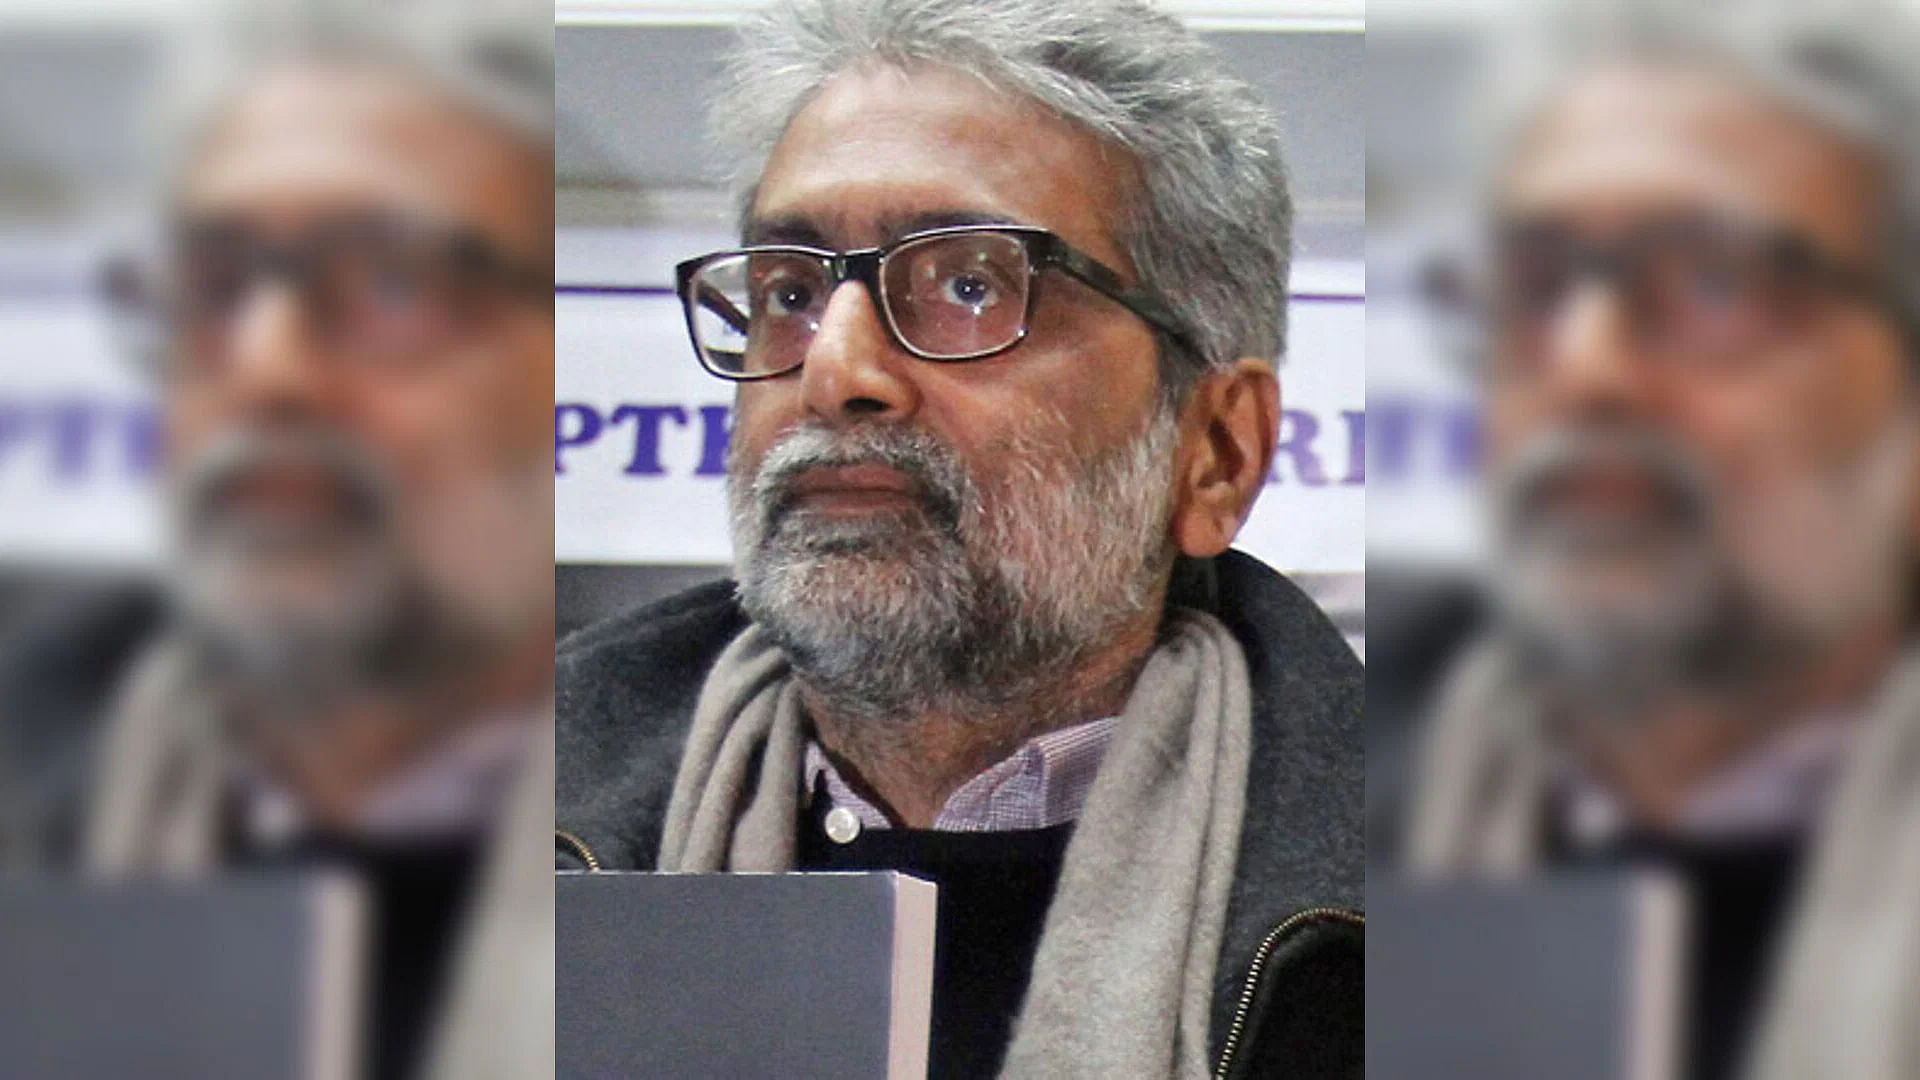 <div class="paragraphs"><p>Navlakha is one of the 11 activists, academics, and lawyers who were <a href="https://www.thequint.com/explainers/arrest-of-dalit-activists-under-uapa-gadling-sen-dhawale-wilson-raut">accused</a> of having Naxal links and giving inflammatory speeches at Pune’s Elgar Parishad meet, which instigated the violence in Bhima Koregaon on 1 January 2018.</p></div>